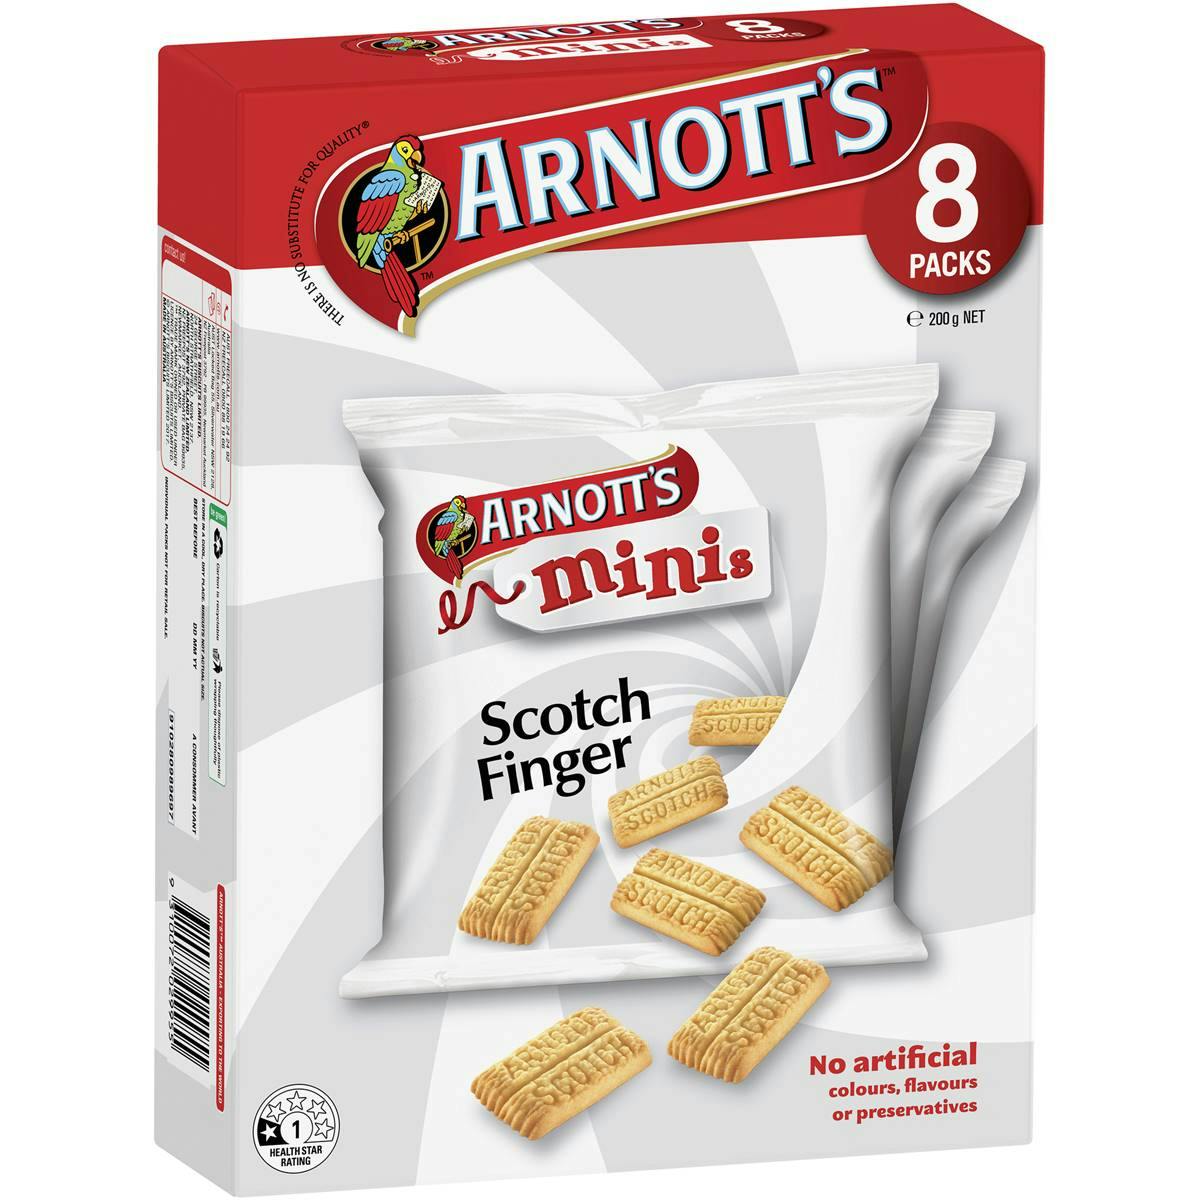 Arnott's Minis Scotch Finger Biscuits (8 Pack)